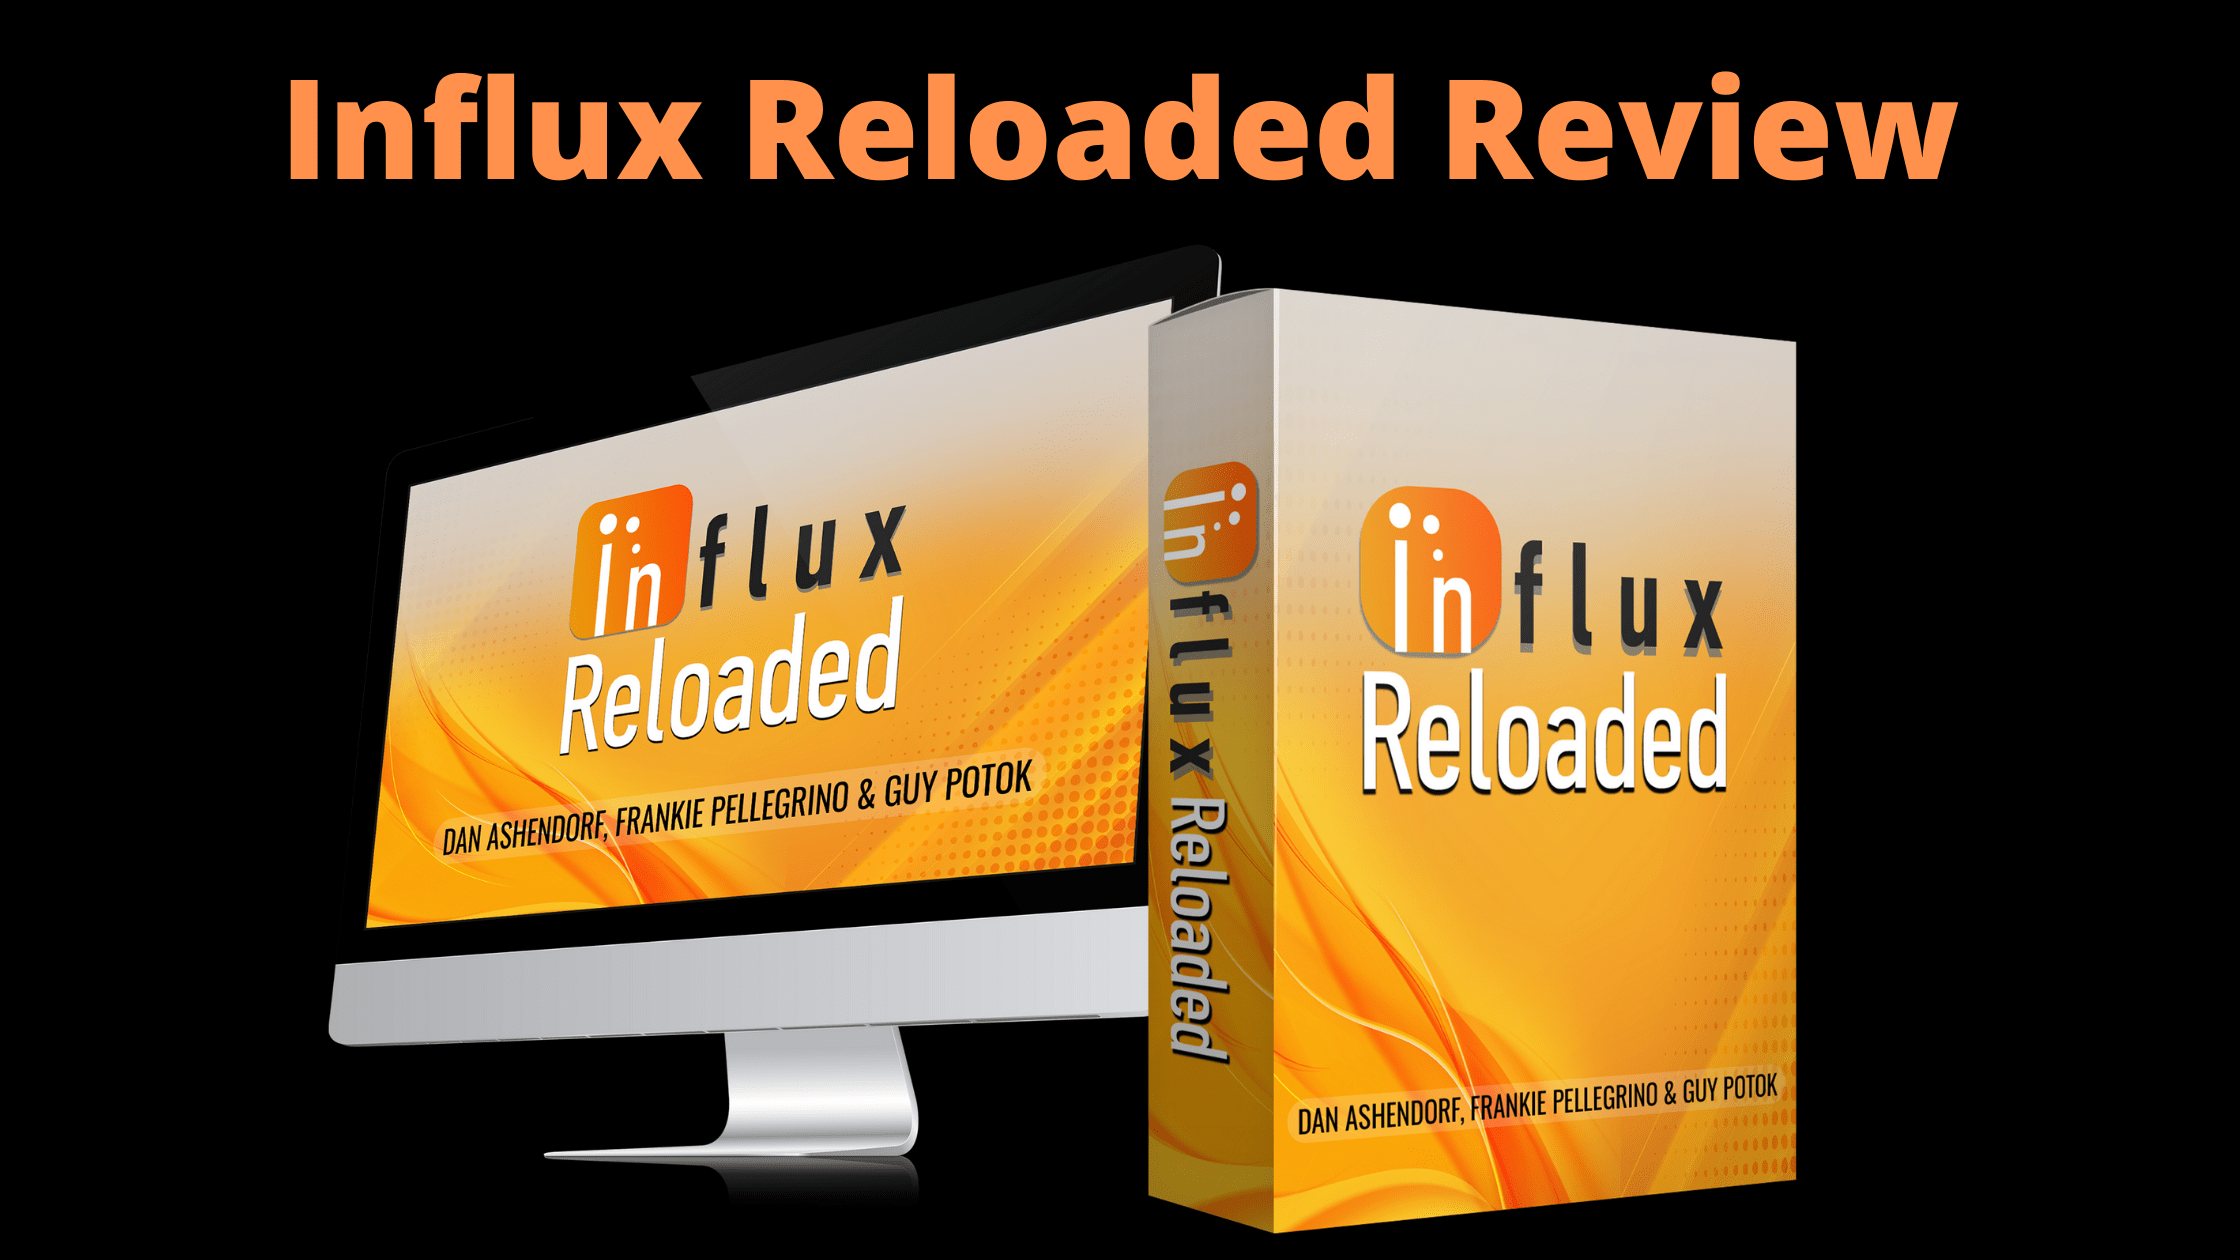 Influx Reloaded Review